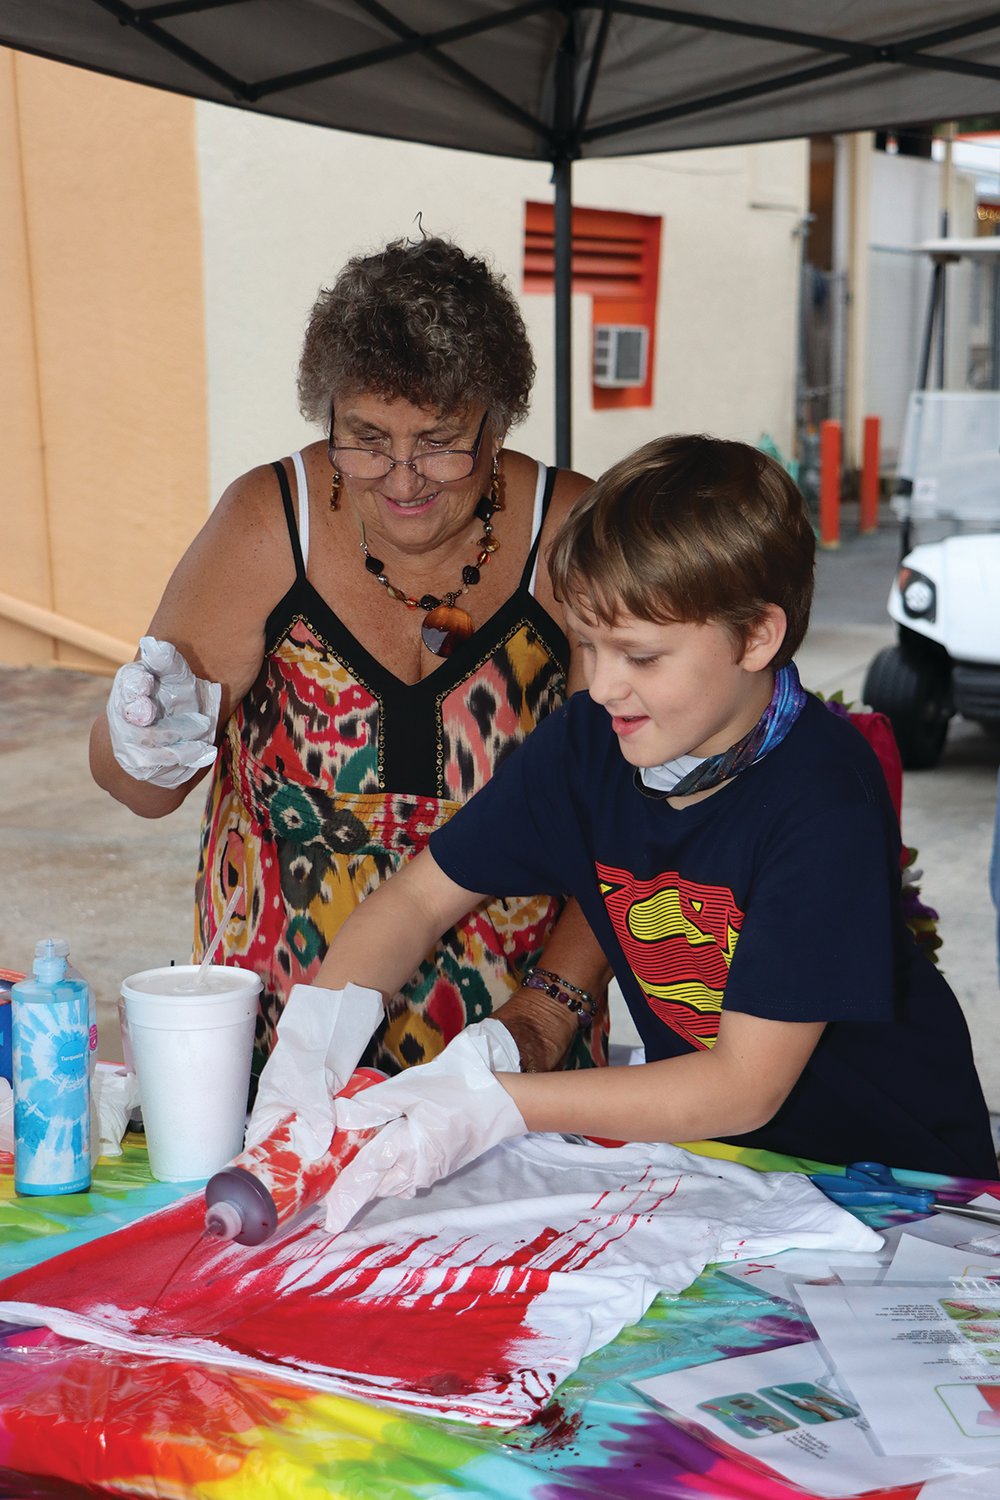 Pictured at the shirt tie-dying station are LDRC board member Christine Eaton and Eli Austin.